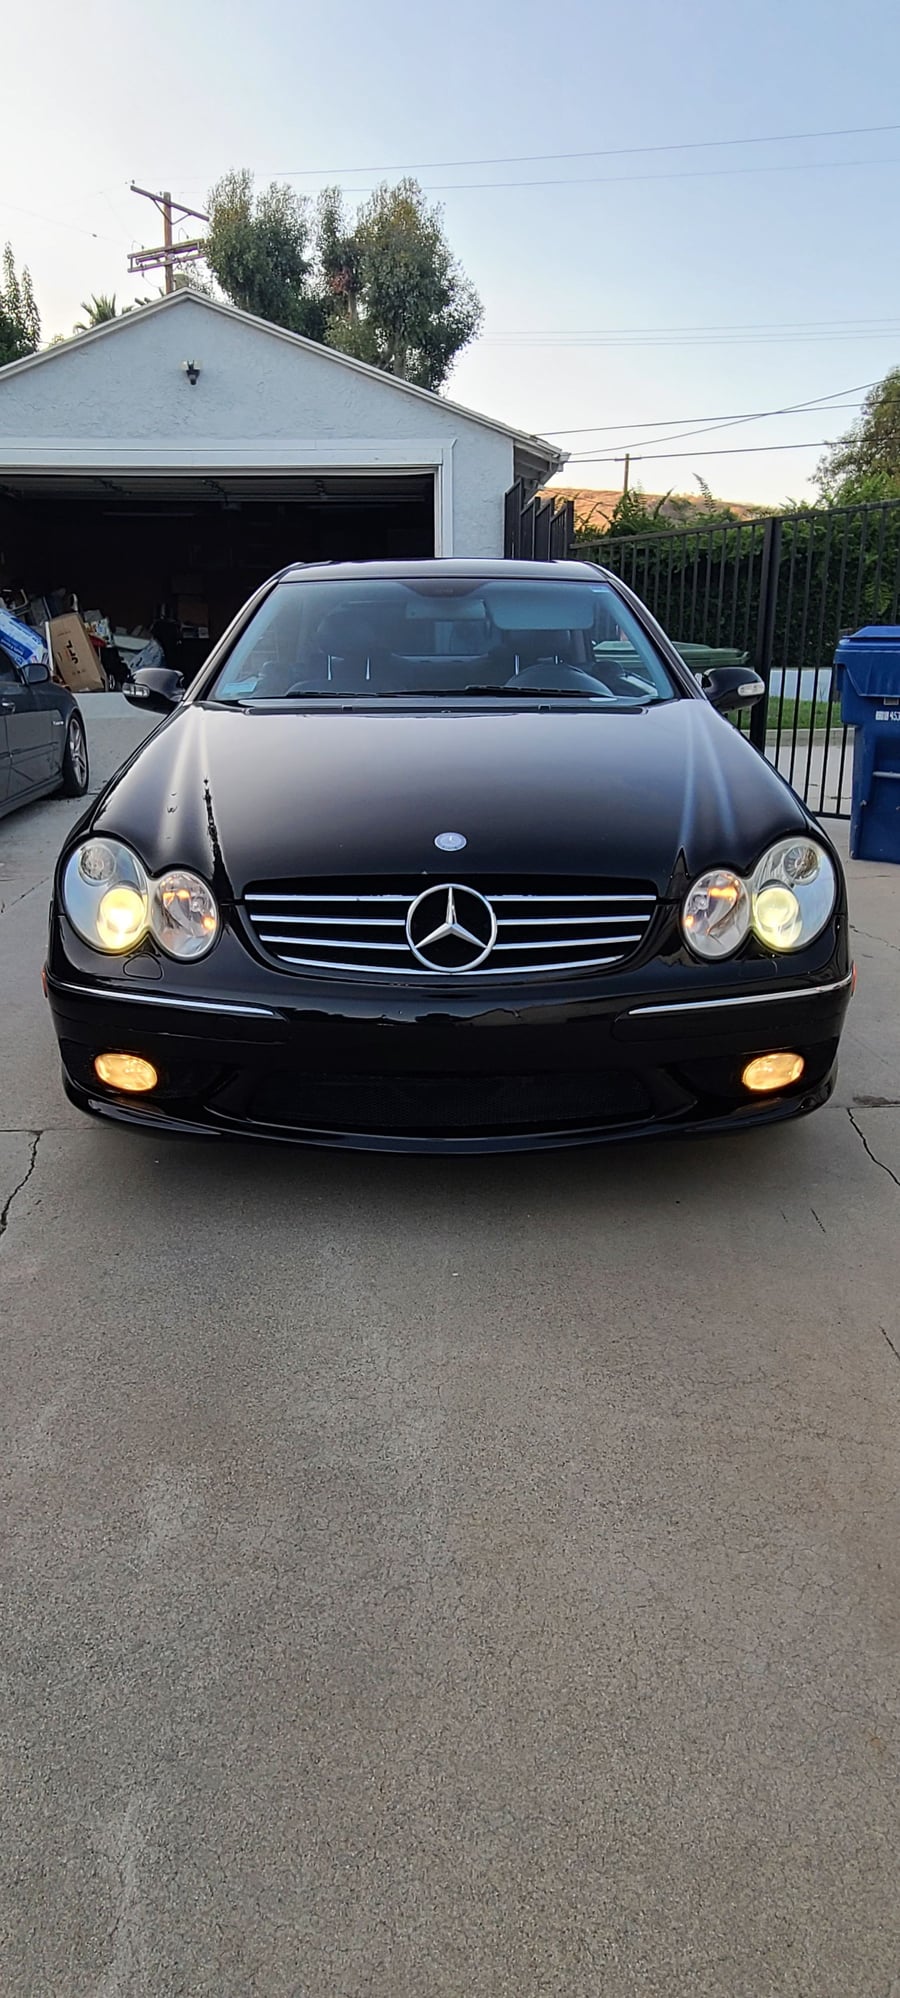 2003 Mercedes-Benz CLK55 AMG - 2003 CLK 55 couple on ebay $5k no reserve auction - Used - VIN WDBTJ76H23F042038 - 152,500 Miles - 8 cyl - 2WD - Automatic - Coupe - Black - L.a., CA 90032, United States